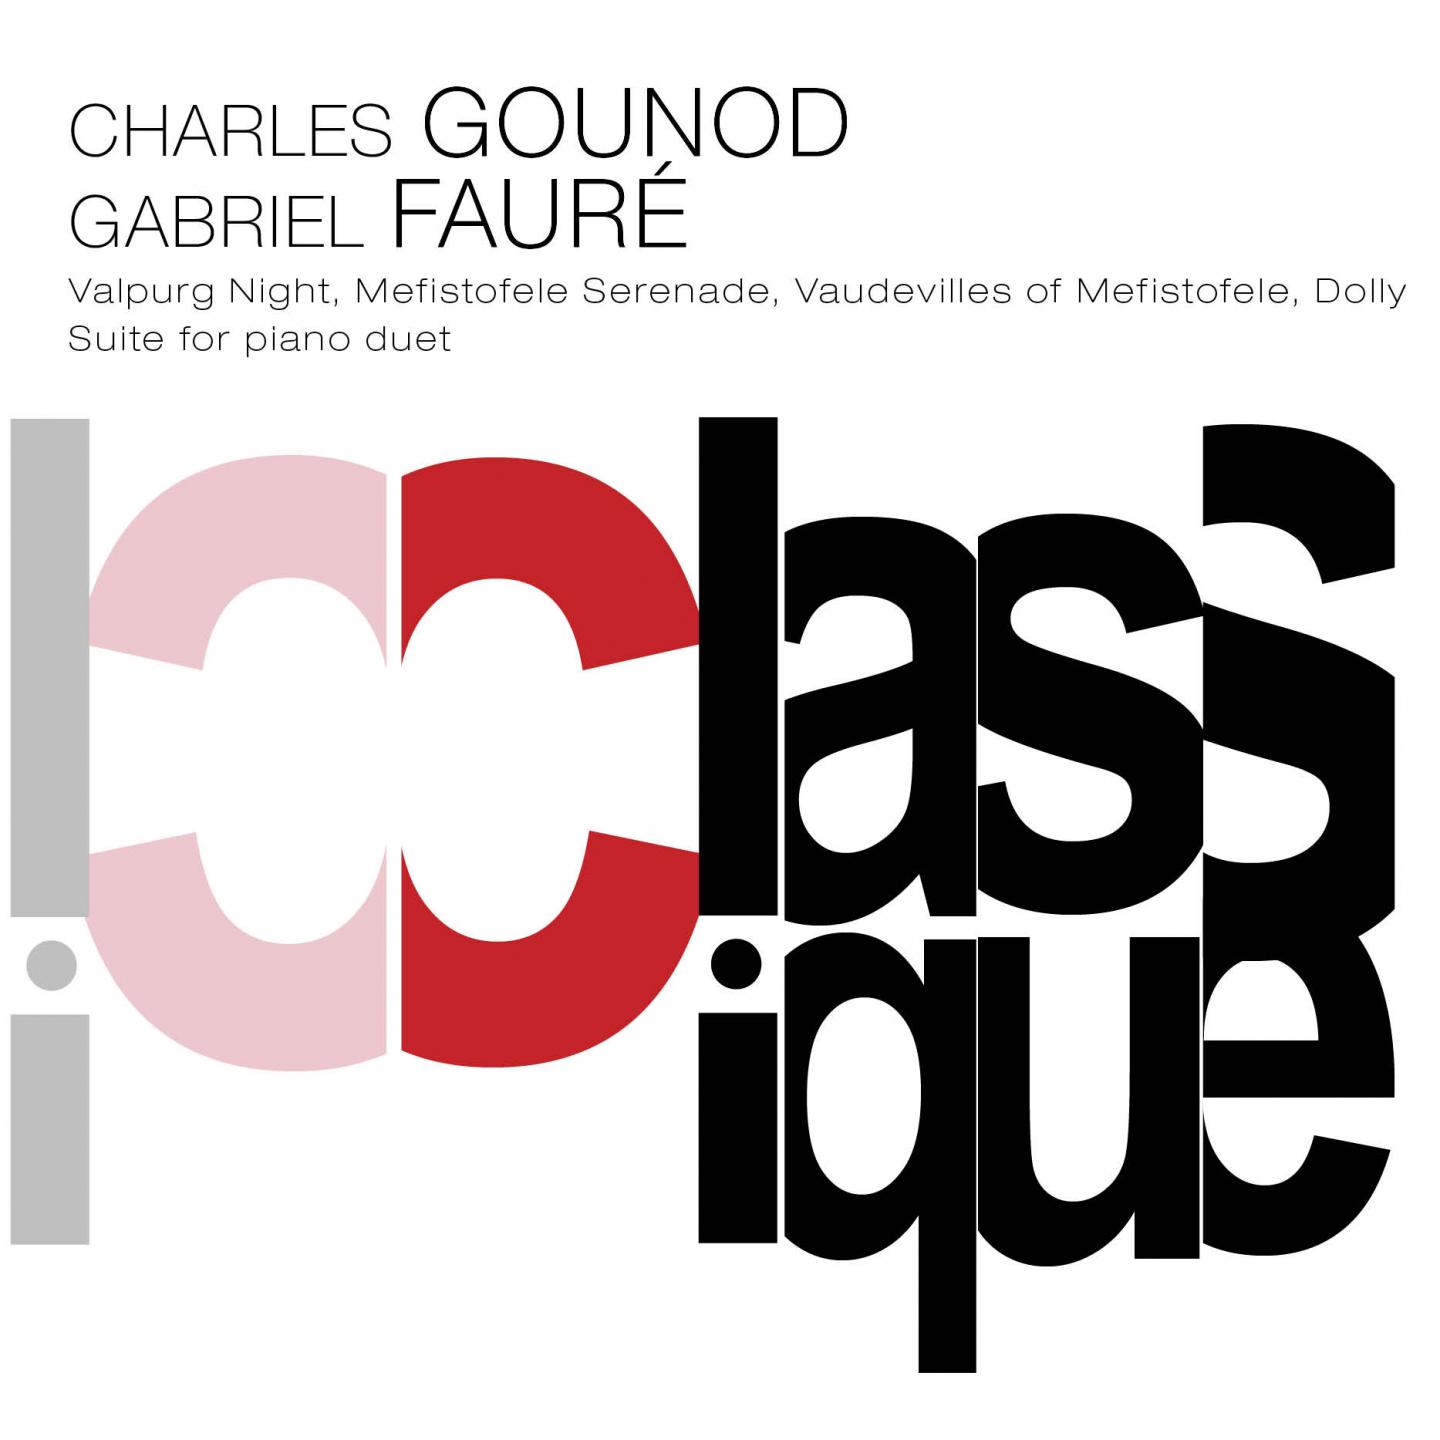 Gounod: Faust  Faure: Dolly Suite, Op. 56